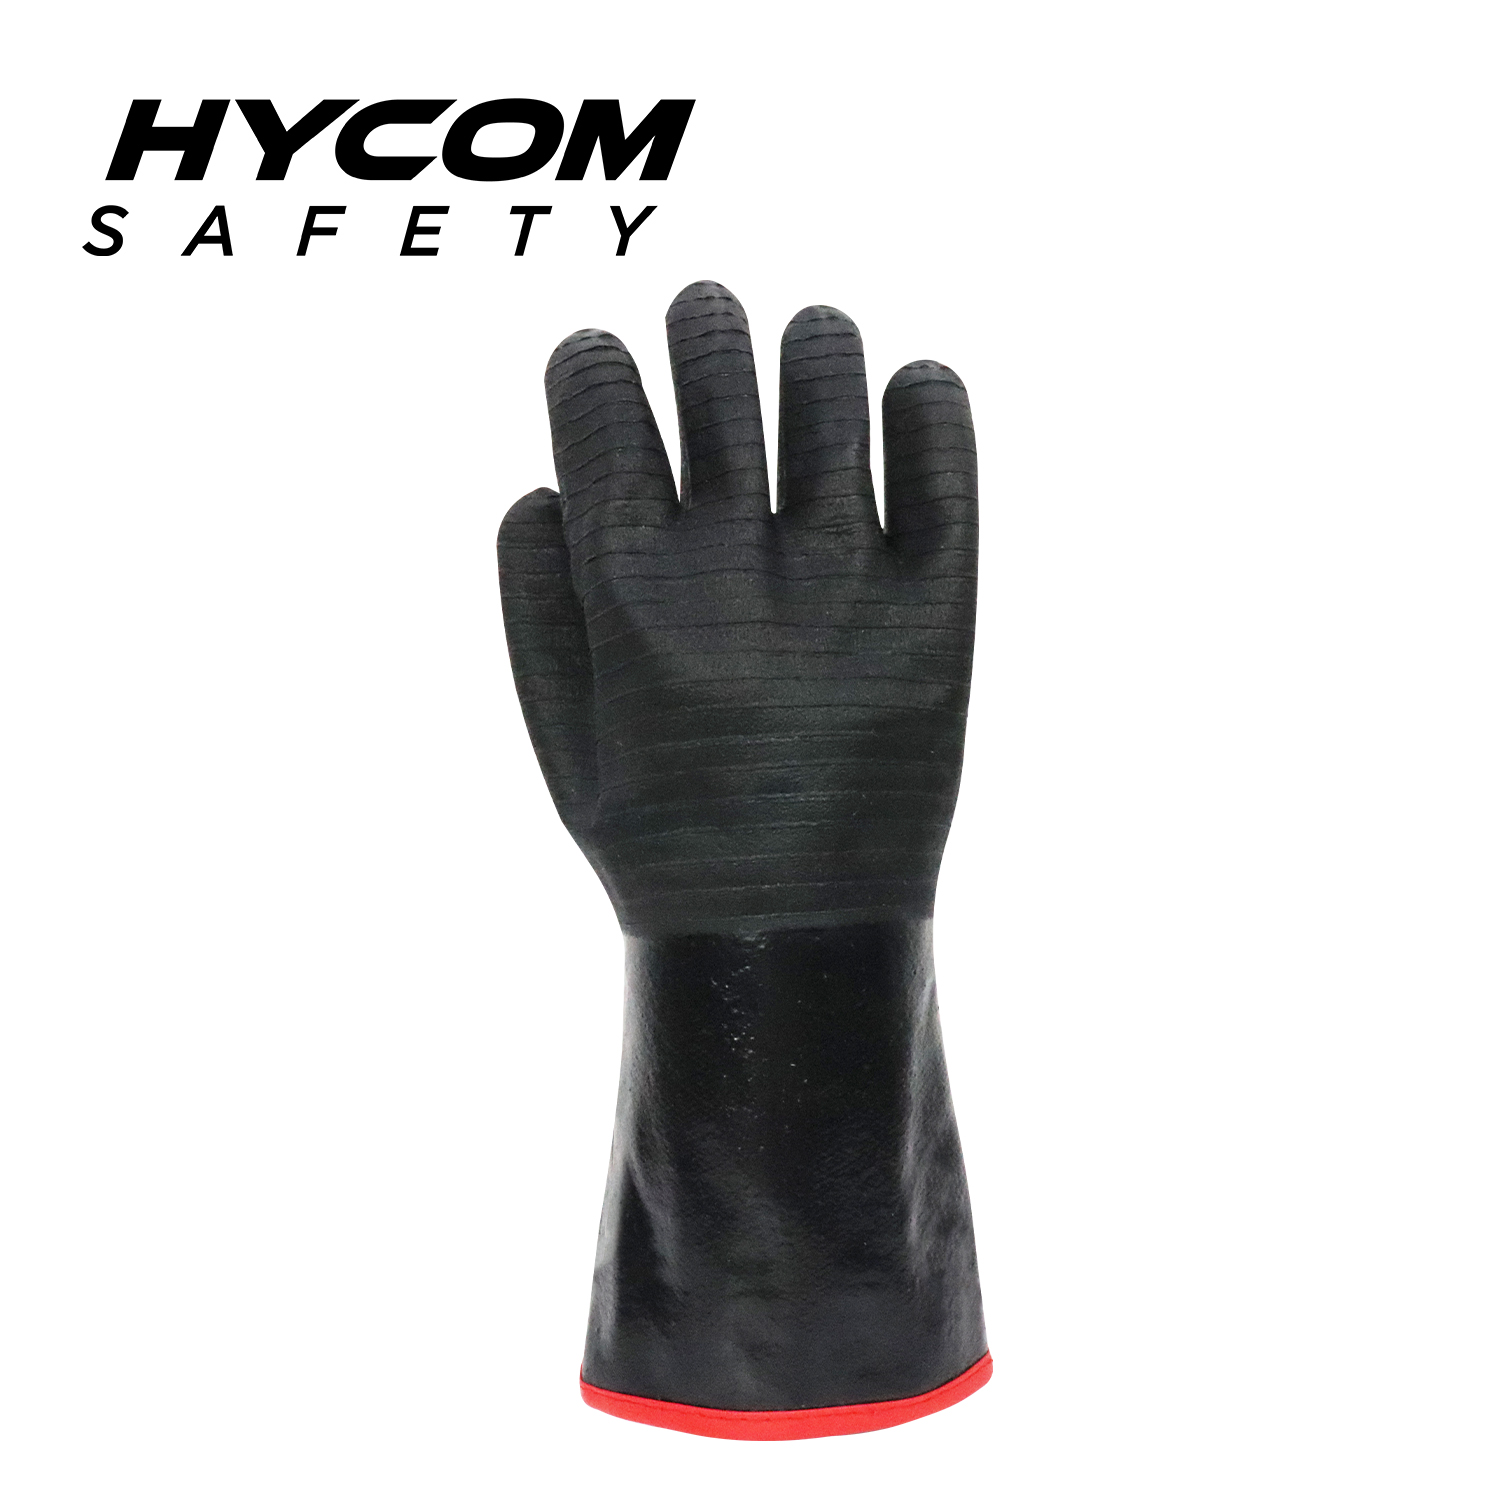 HYCOM Super Grip Water Proof Oil Resistant Barbecue Glove with 450°C/840°F Contact Temperature Food Grade Safety Gloves